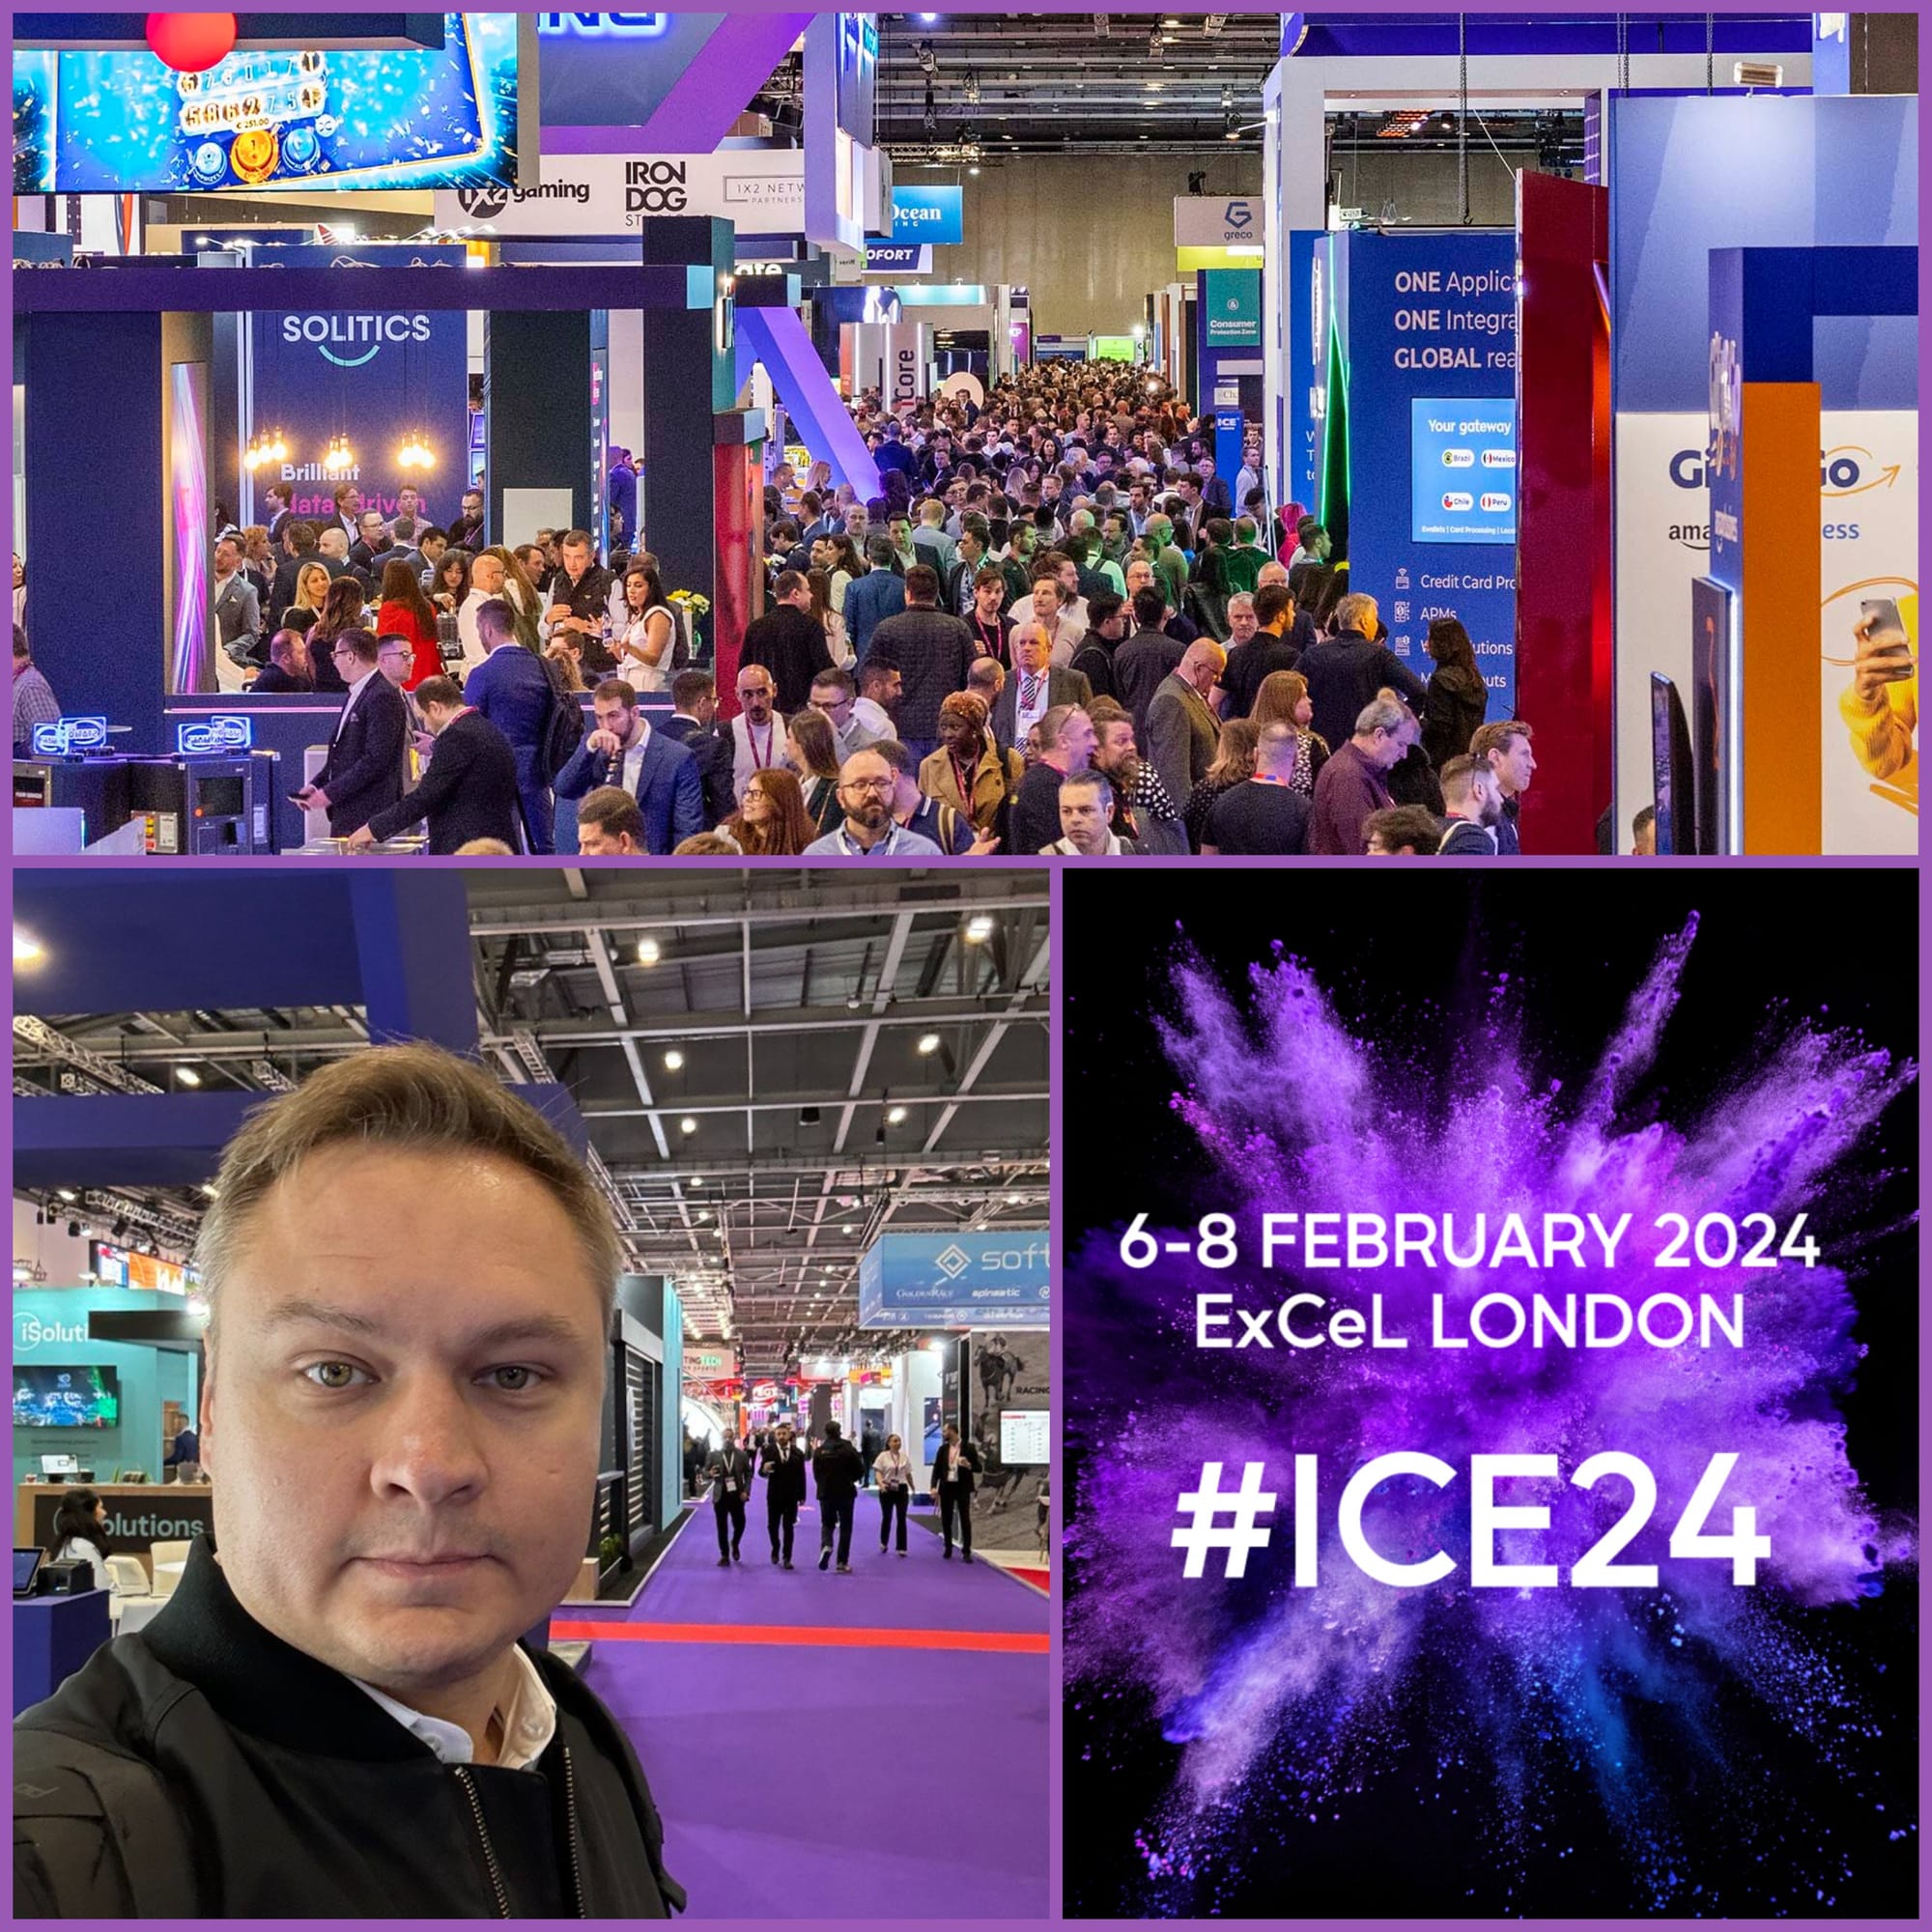 Kosta Du Explores Future Tech at ICE Exhibition, Representing Dapio's Visionary Payment Innovations